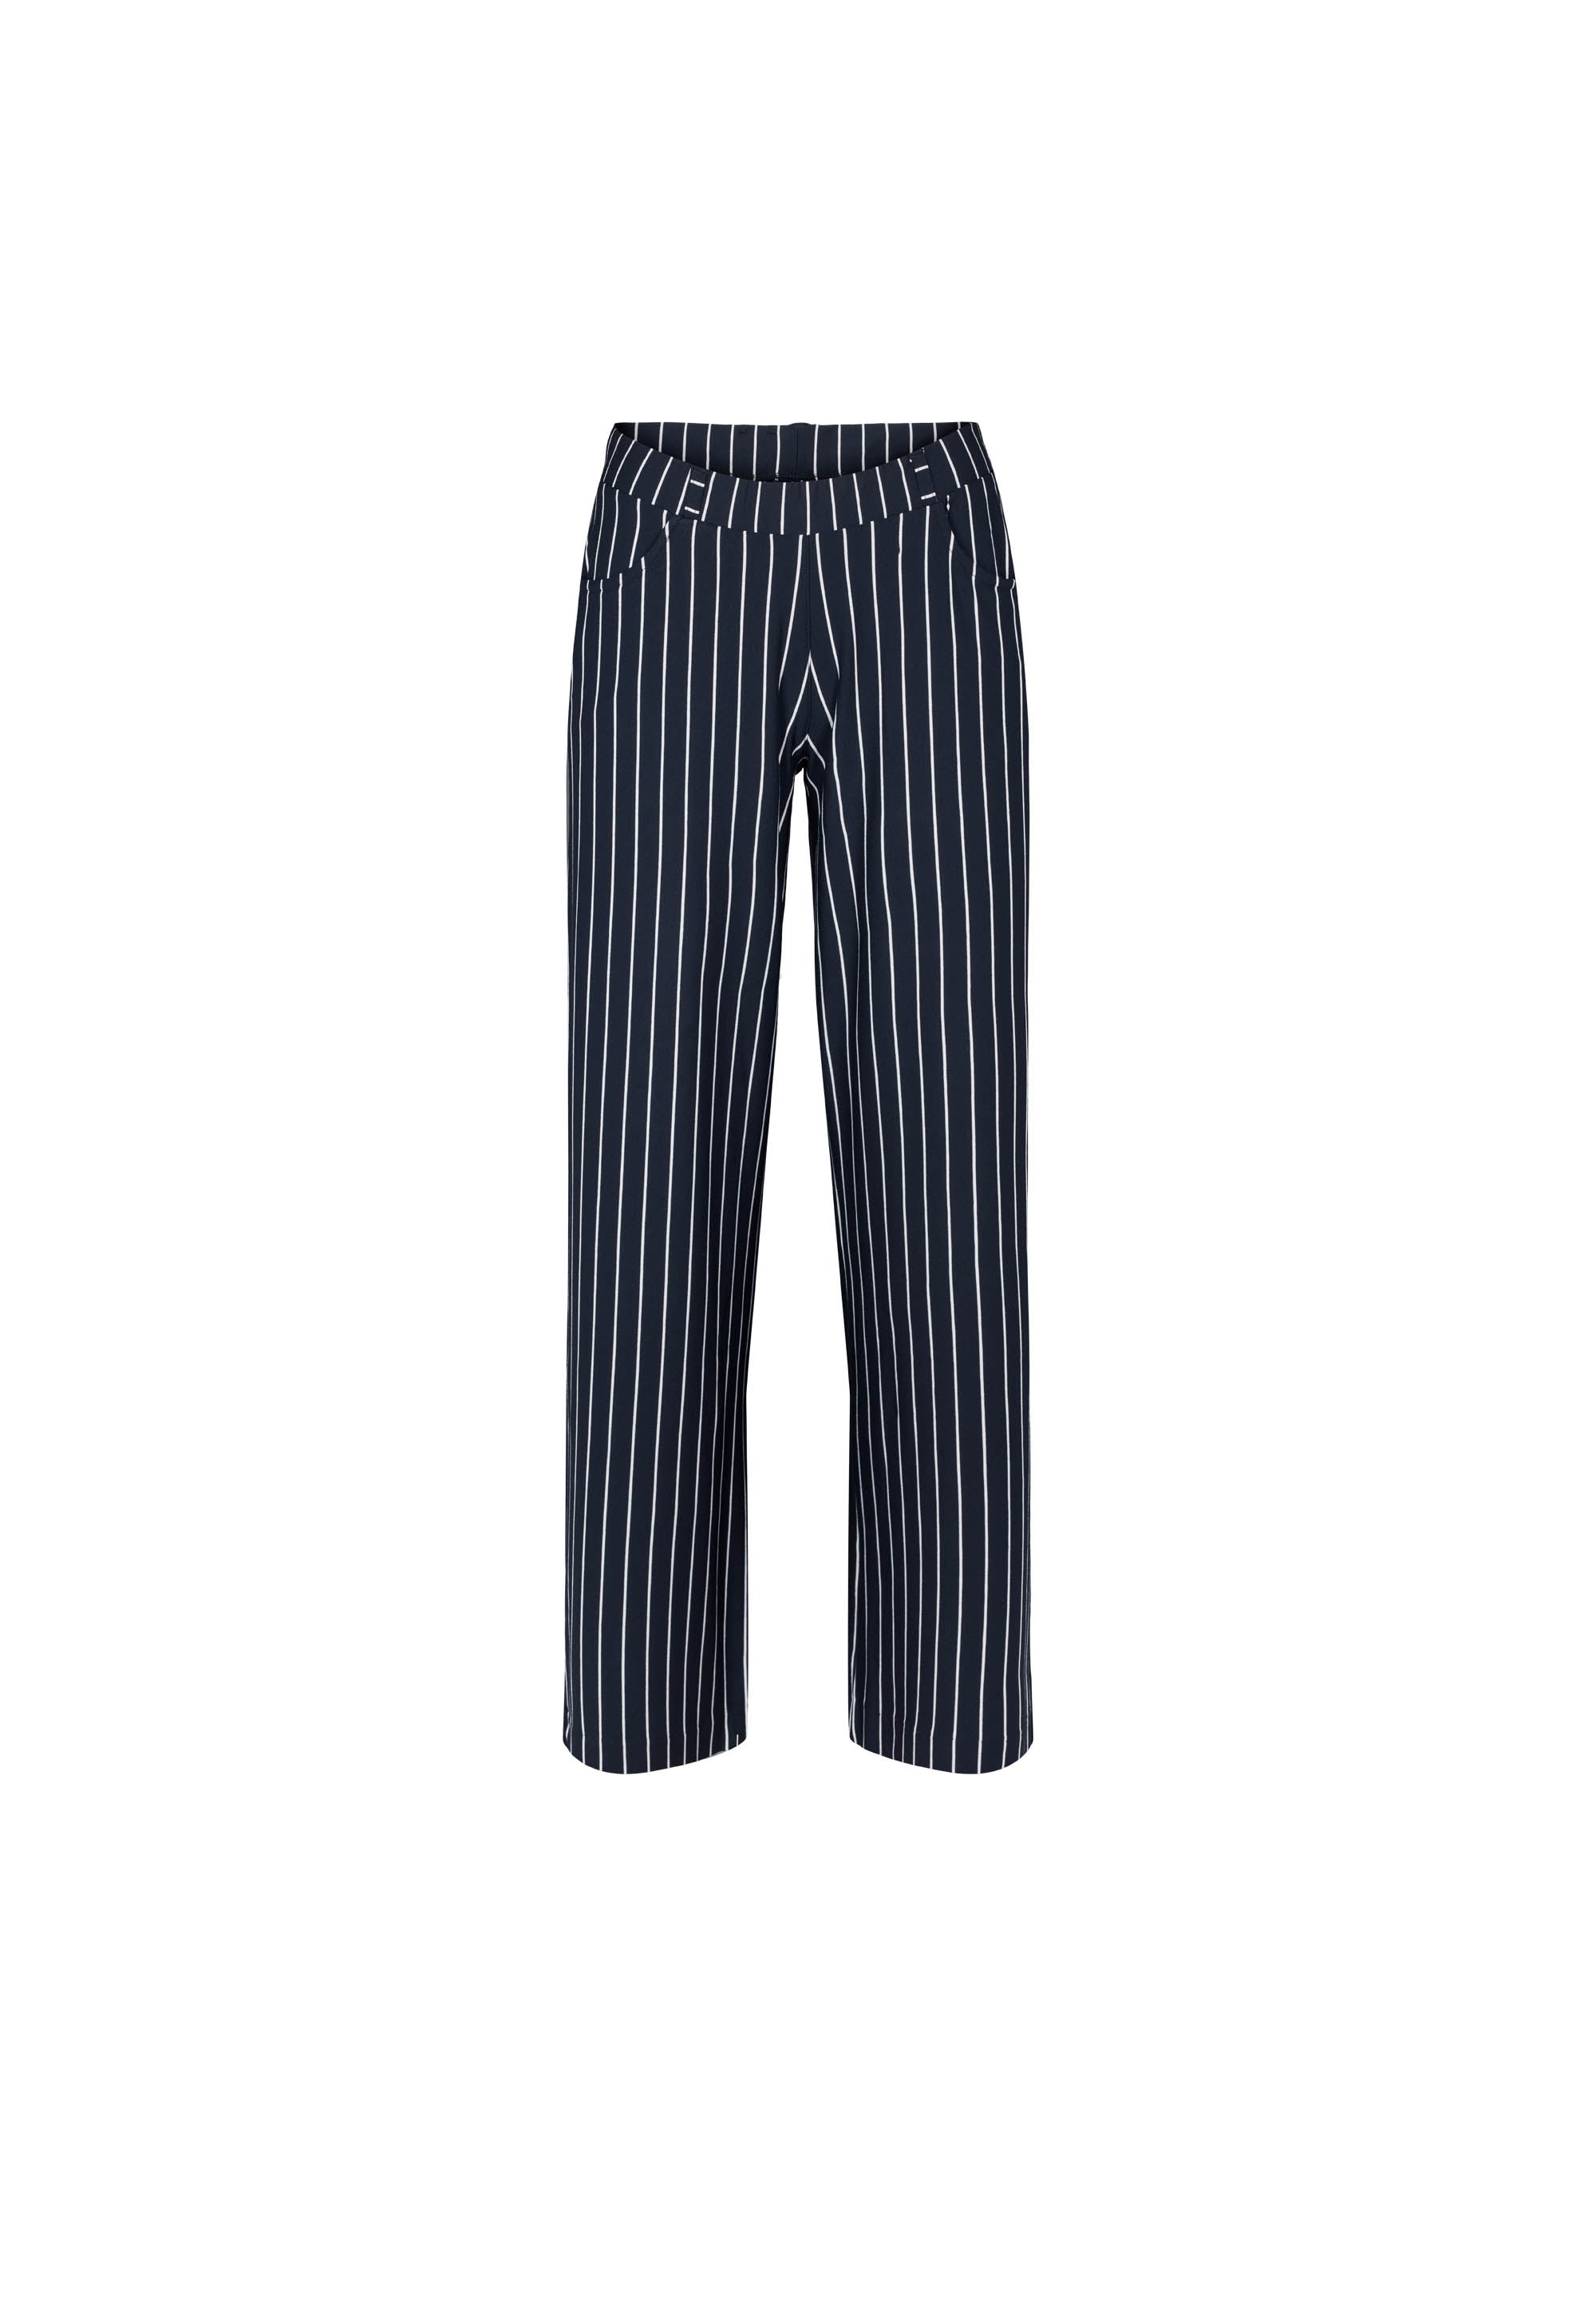 LAURIE Donna Loose Jersey - Short Length Trousers LOOSE 49222 Navy Stripe